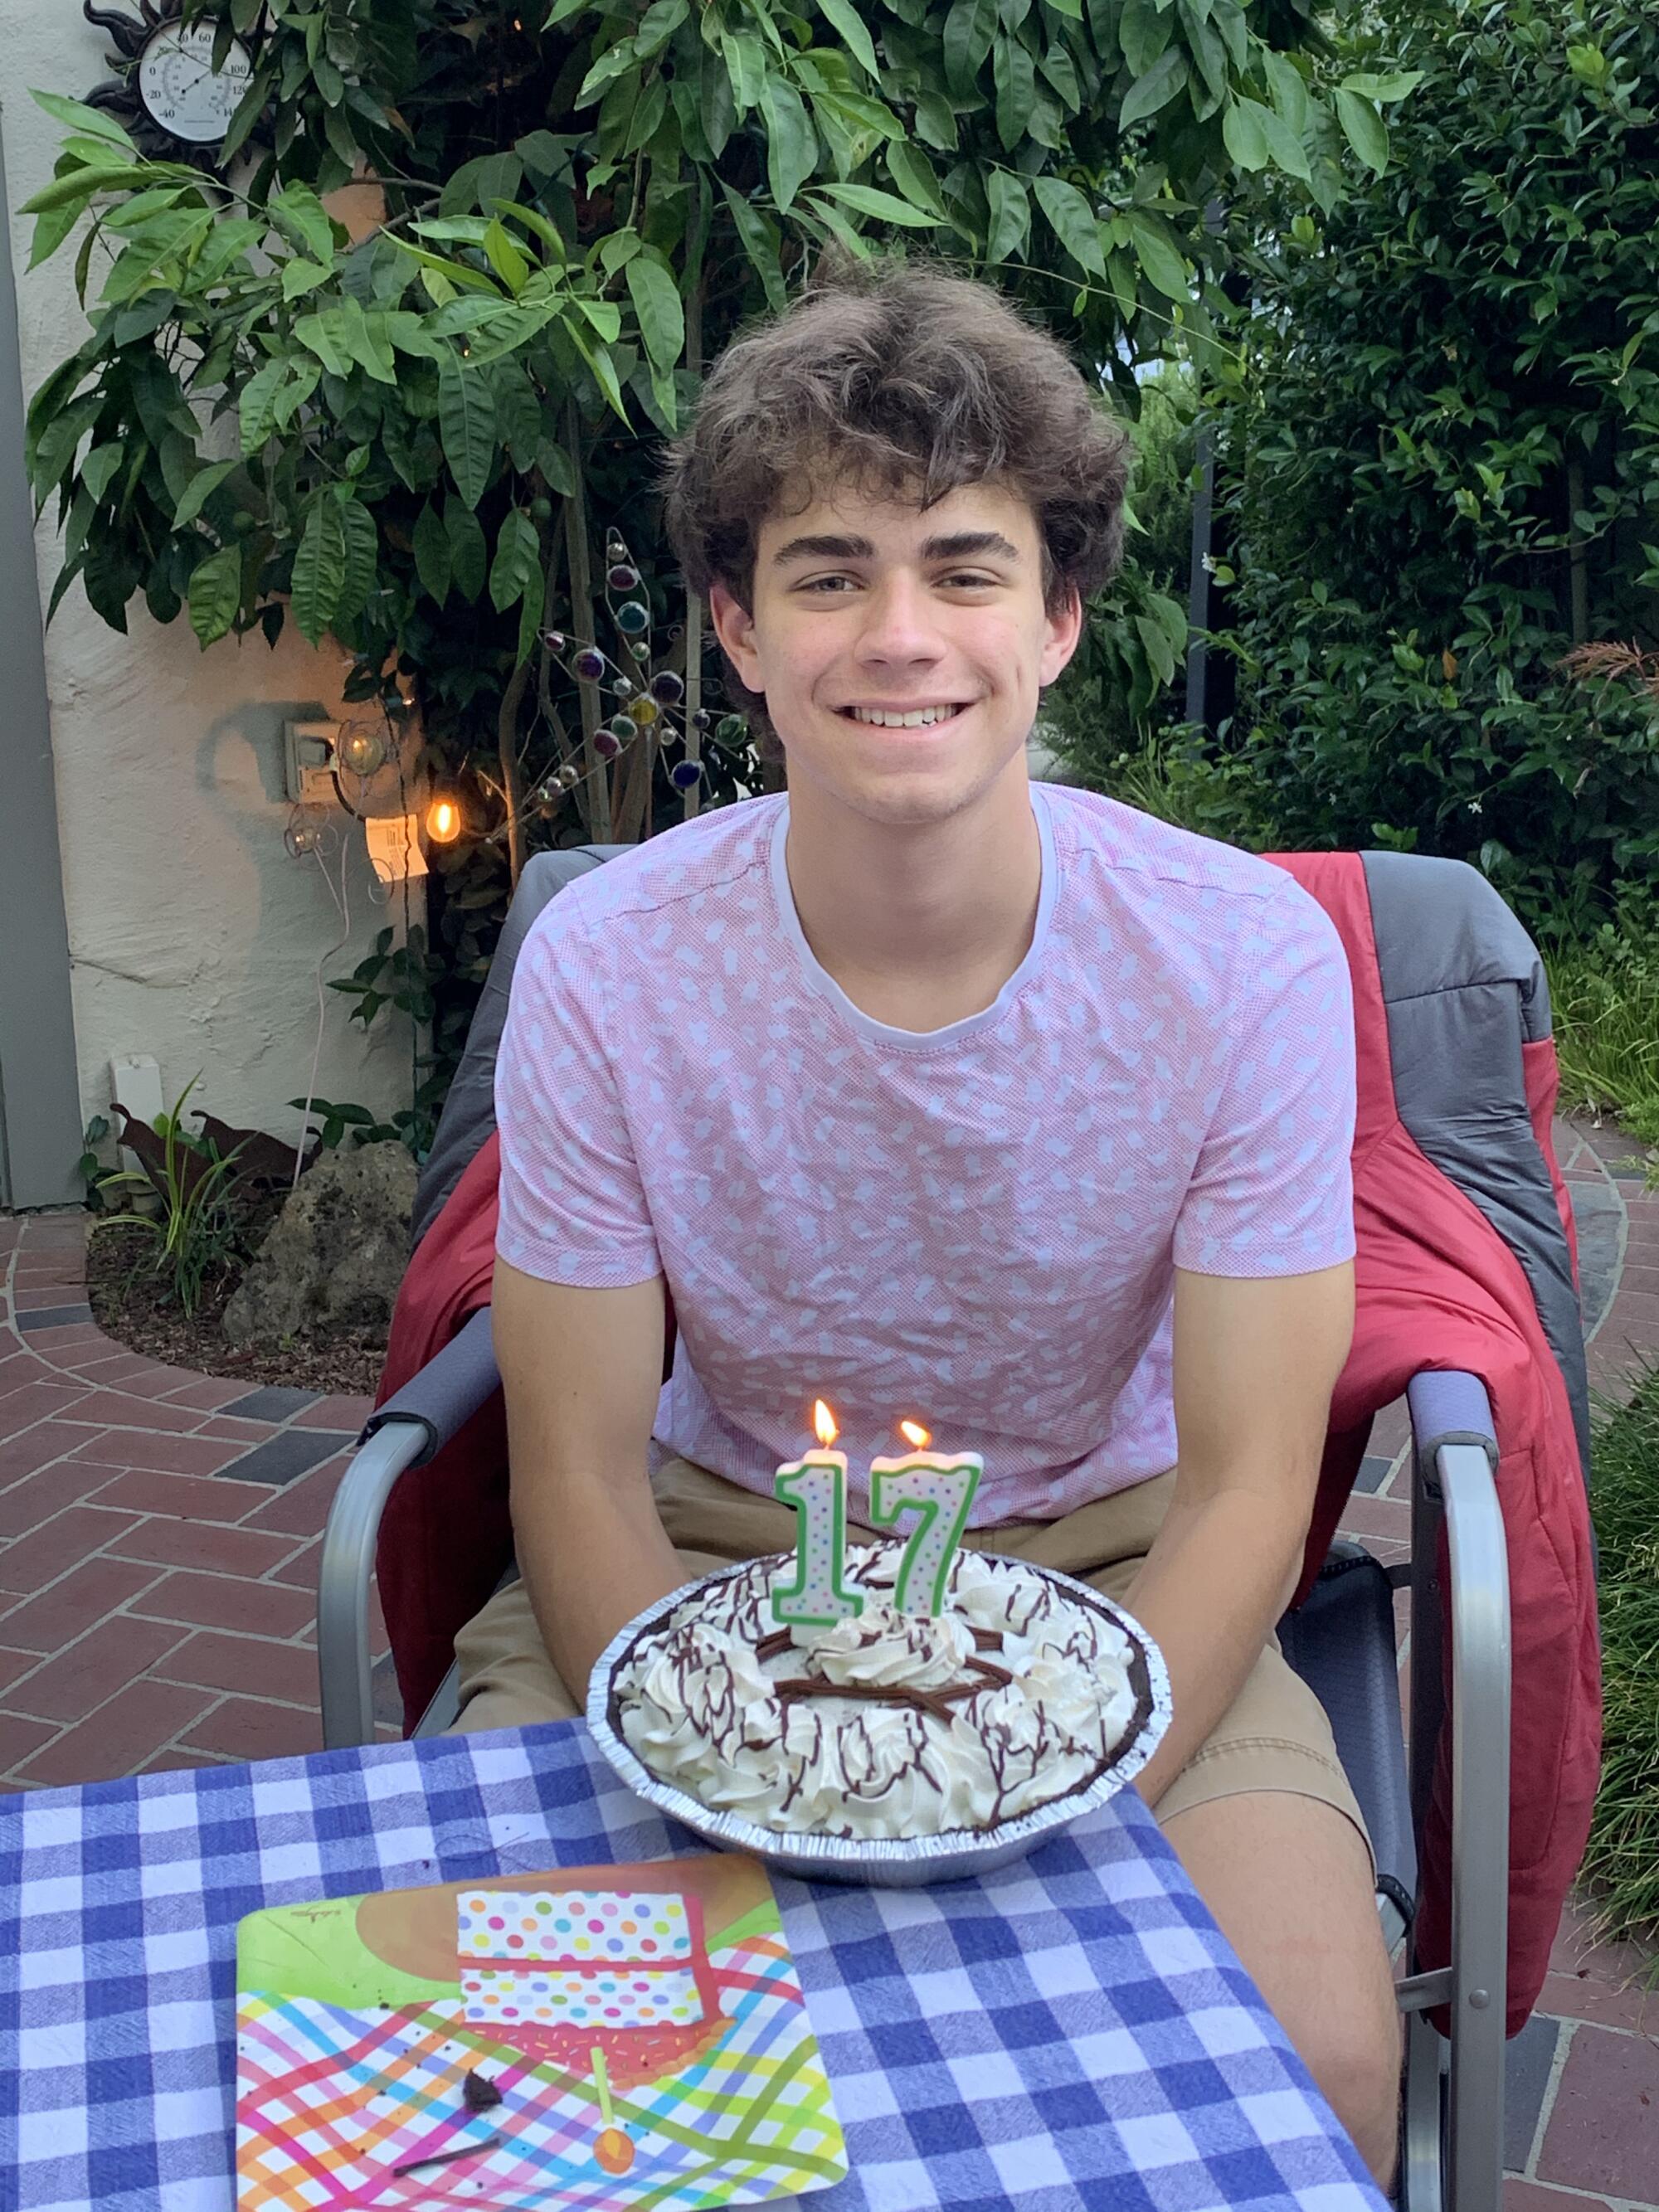 A teenager celebrating his 17th birthday with a cake and candles